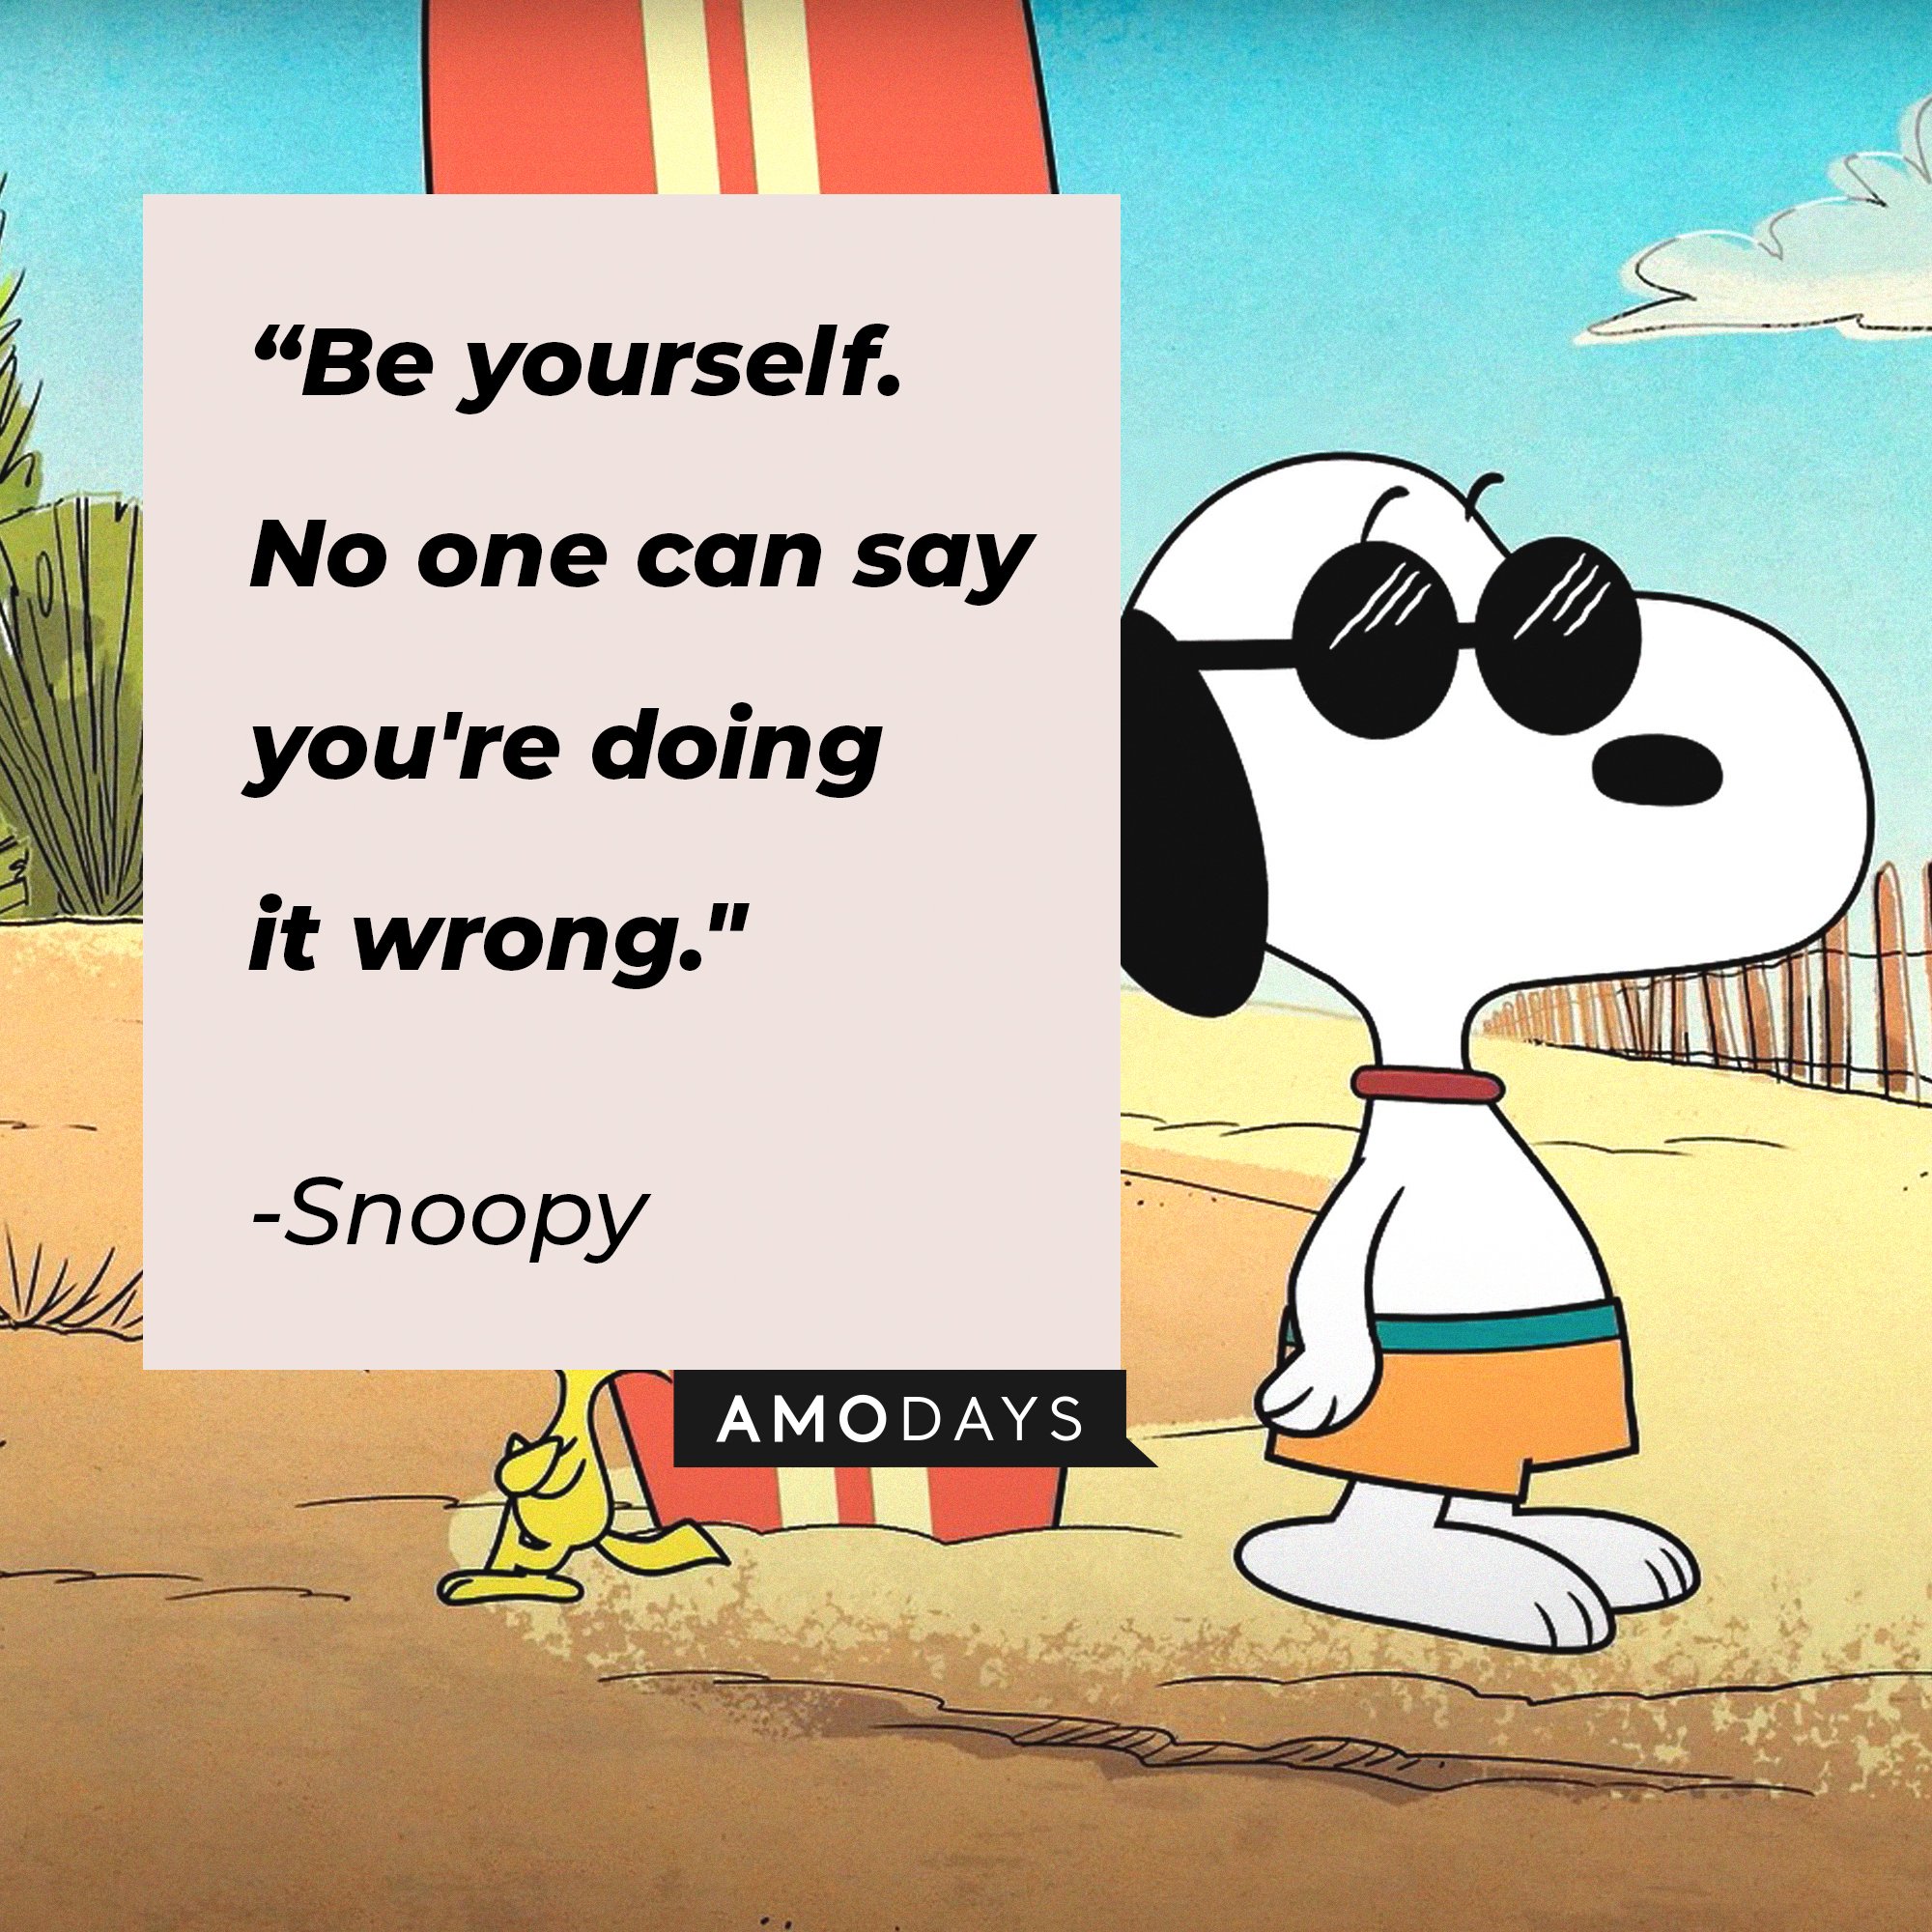 Snoopy’s quote: “Be yourself. No one can say you're doing it wrong." | Image: AmoDays  